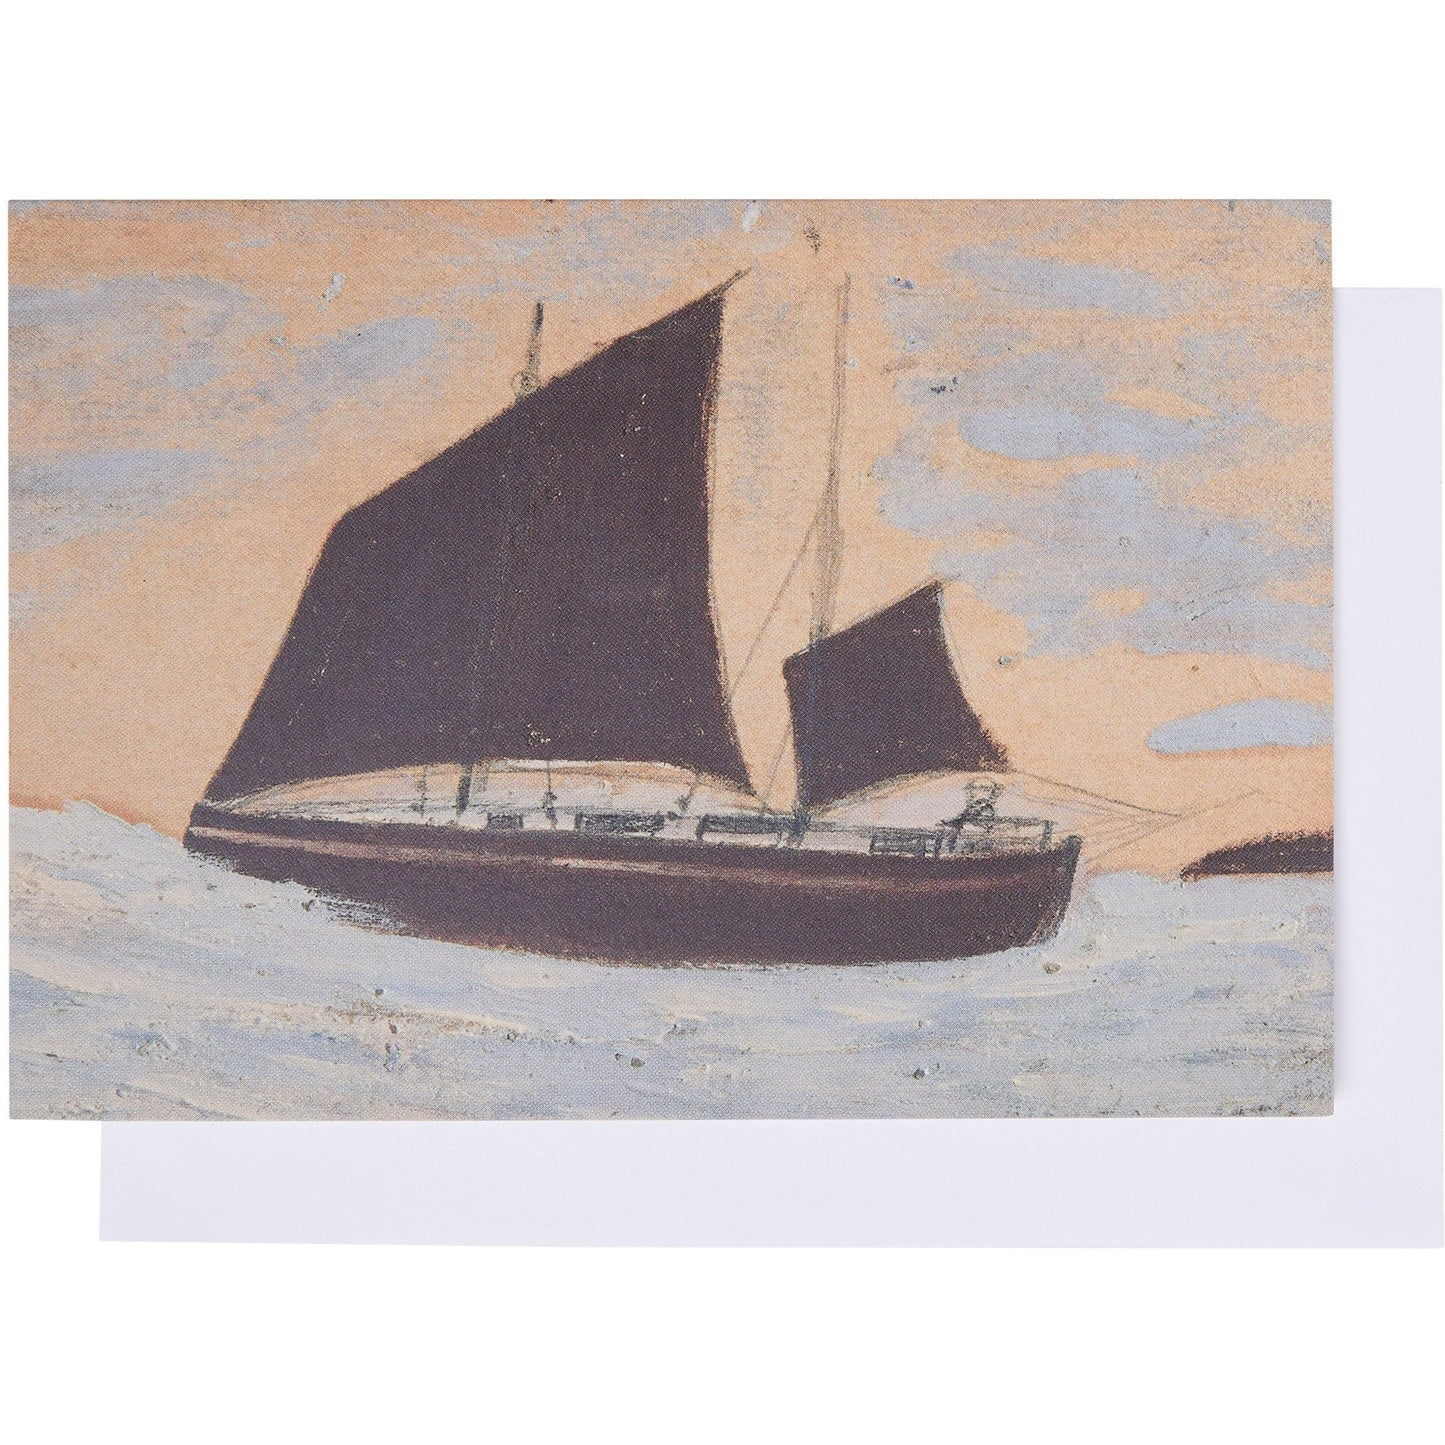 Notelet with envelope - Brown Sailing Boat by Alfred Wallis. From the collection of Kettle's Yard, brought to you by CuratingCambridge.com